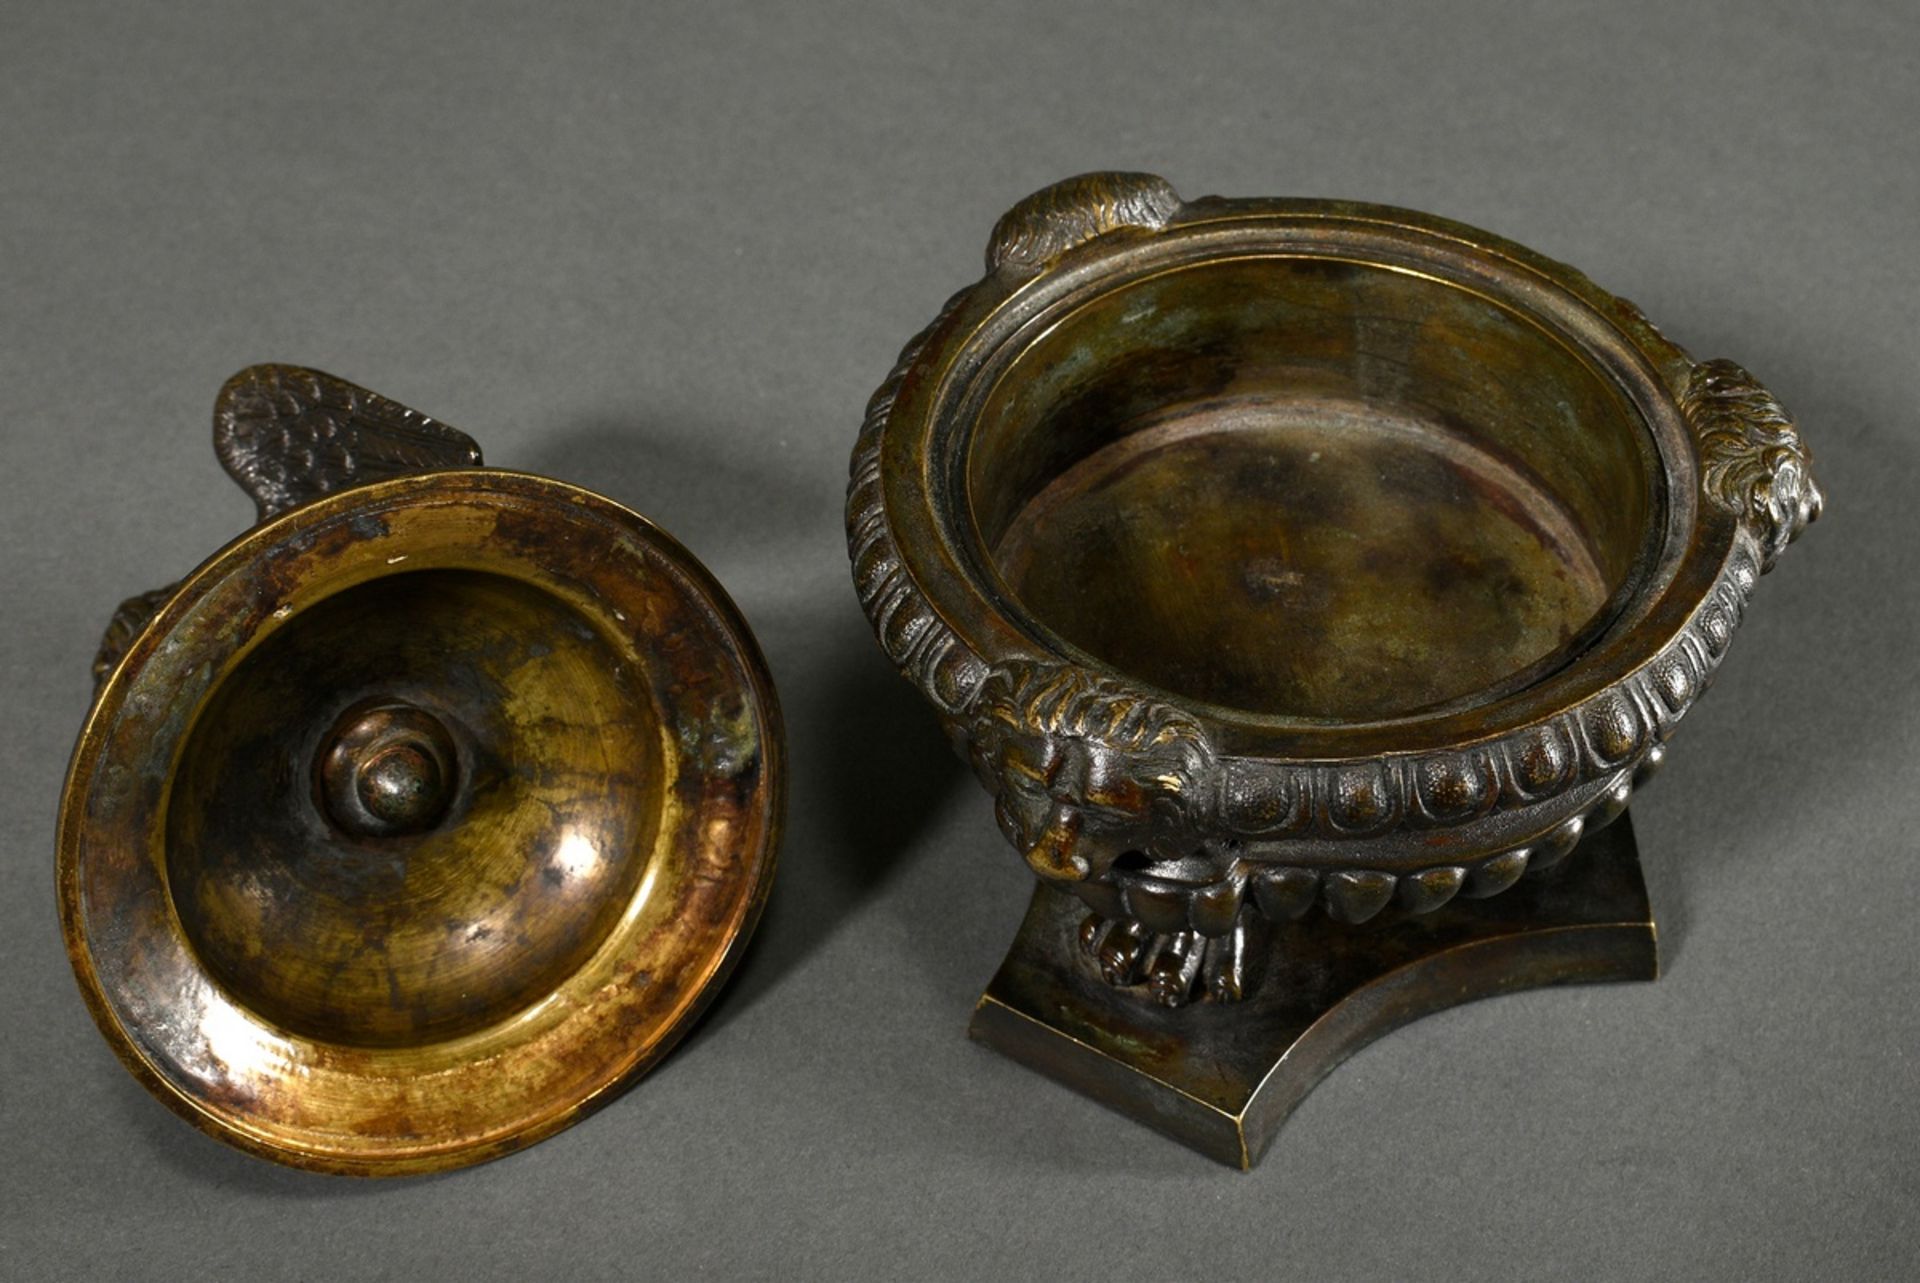 Bronze inkwell after a Renaissance model, fluted bowl with dog heads and lid with sculptural armour - Image 3 of 7